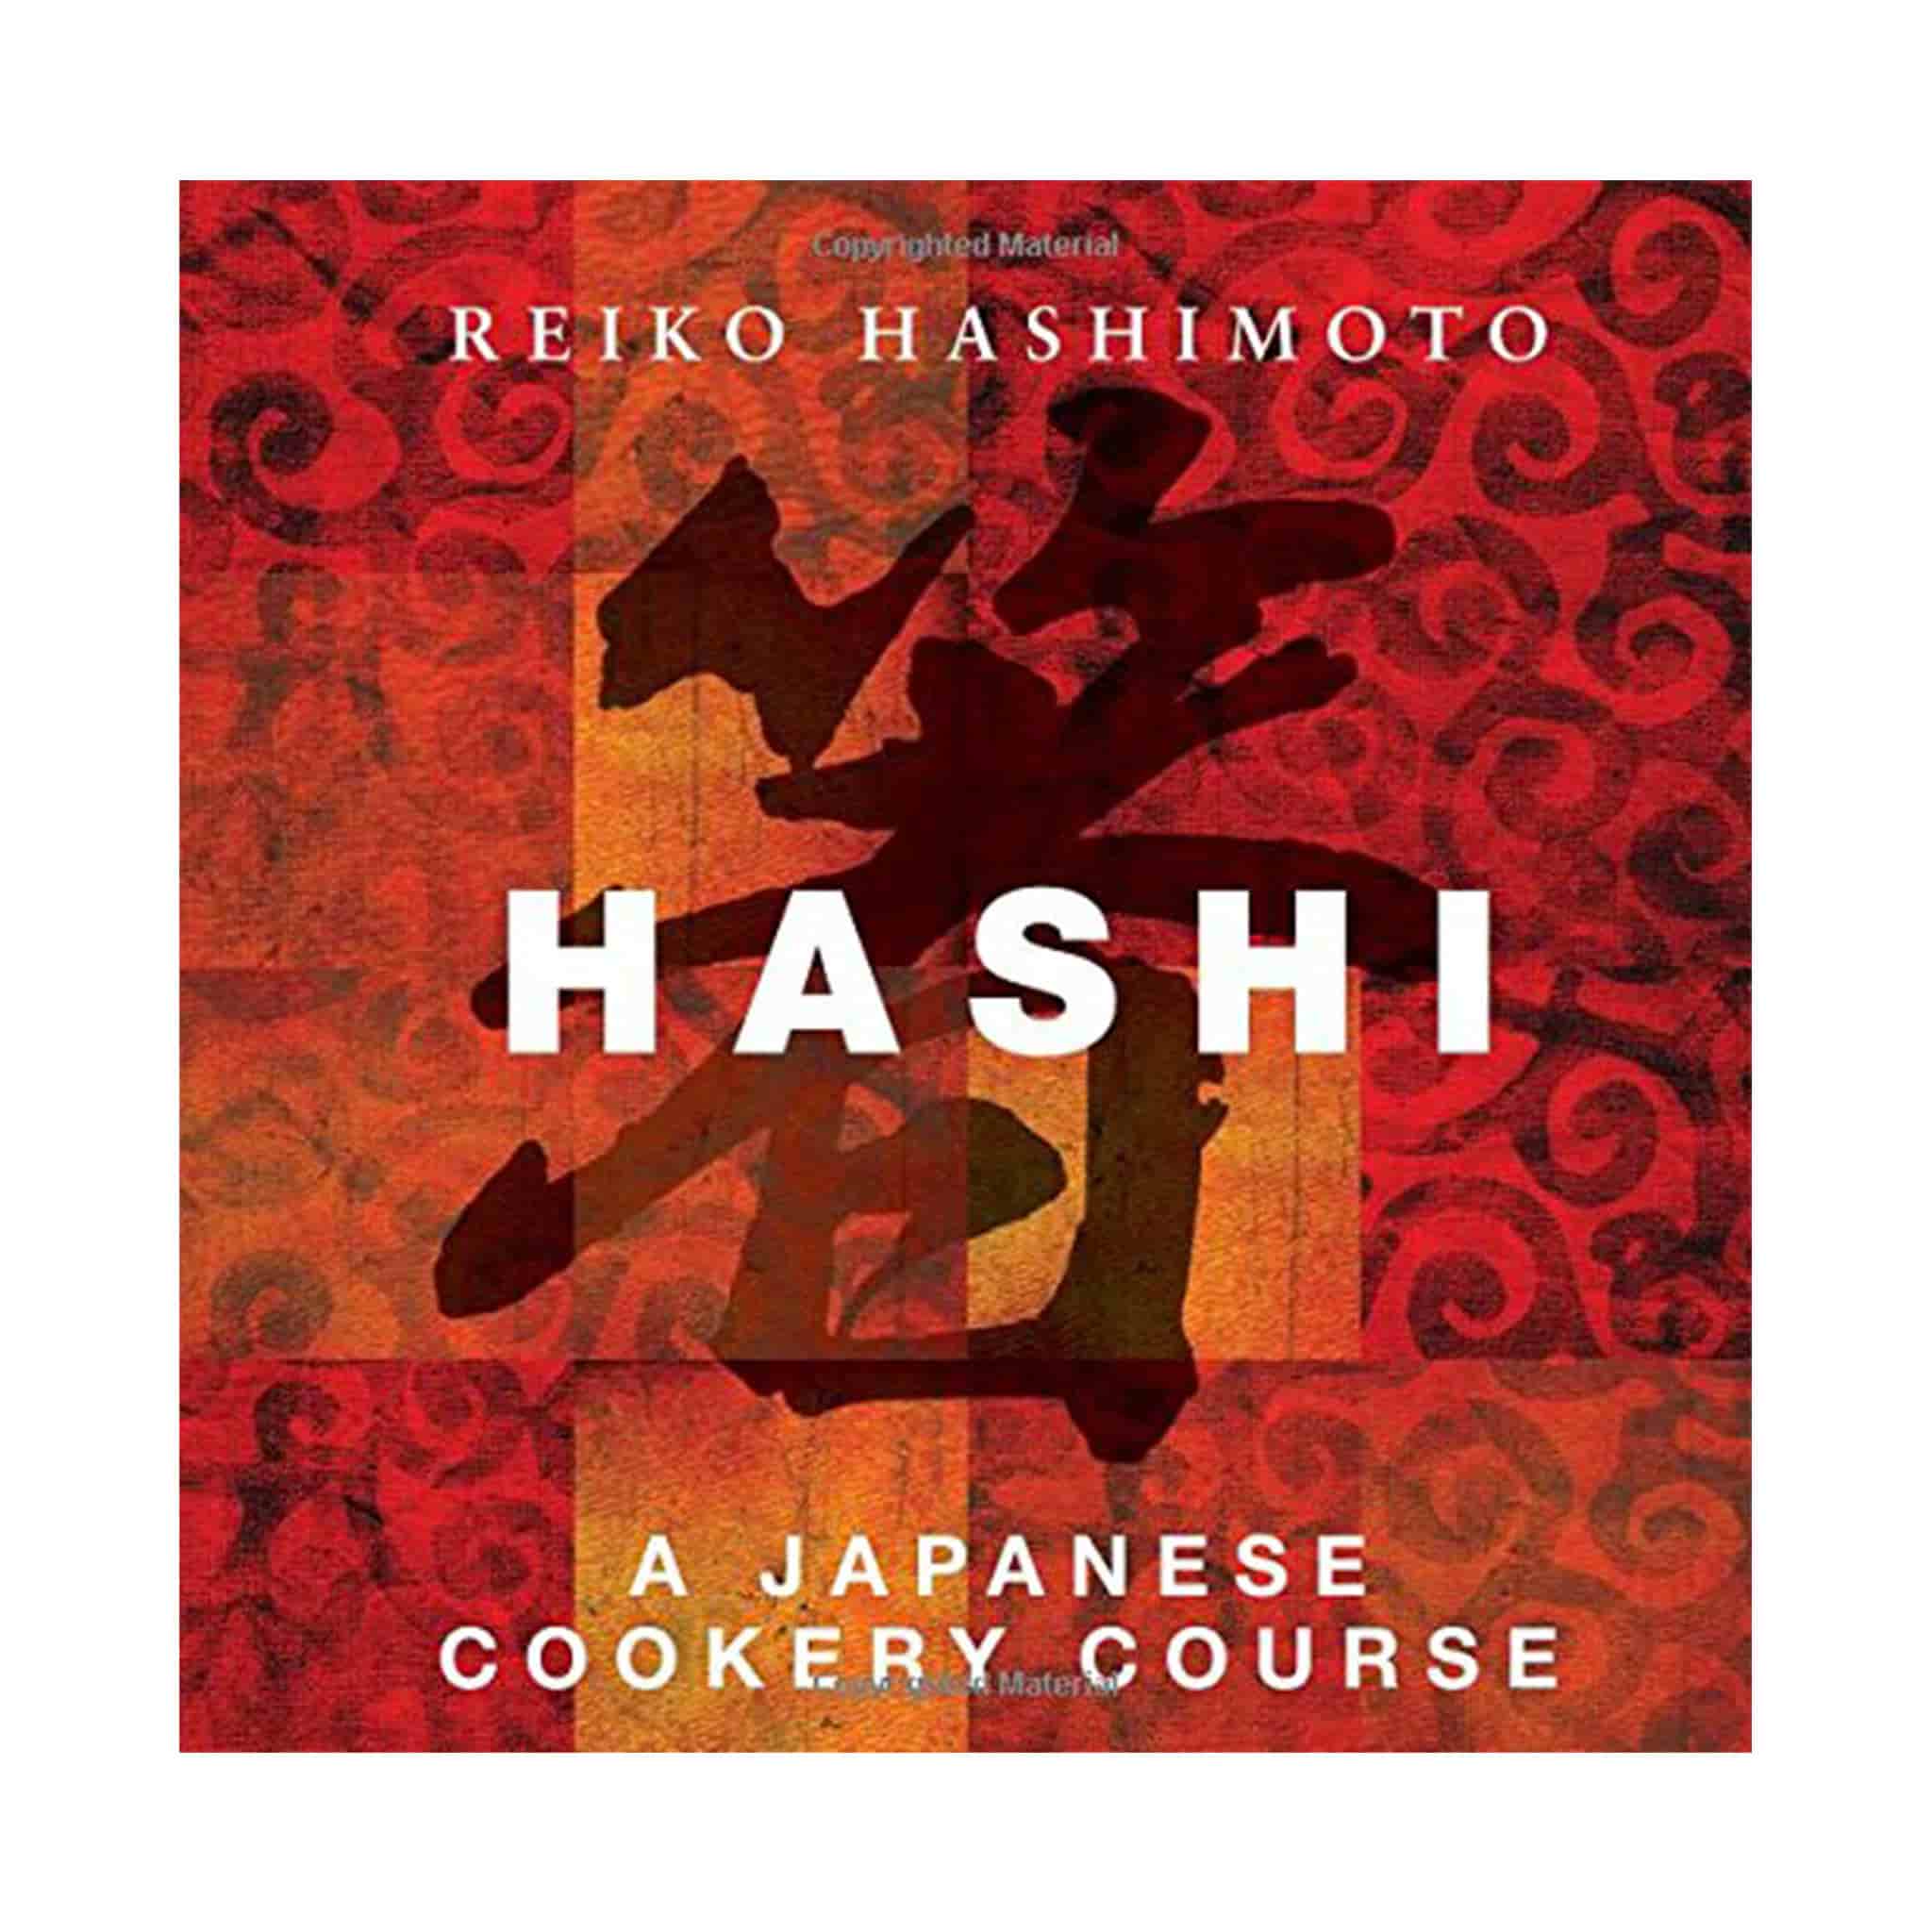 Hashi - A Japanese Cookery Course